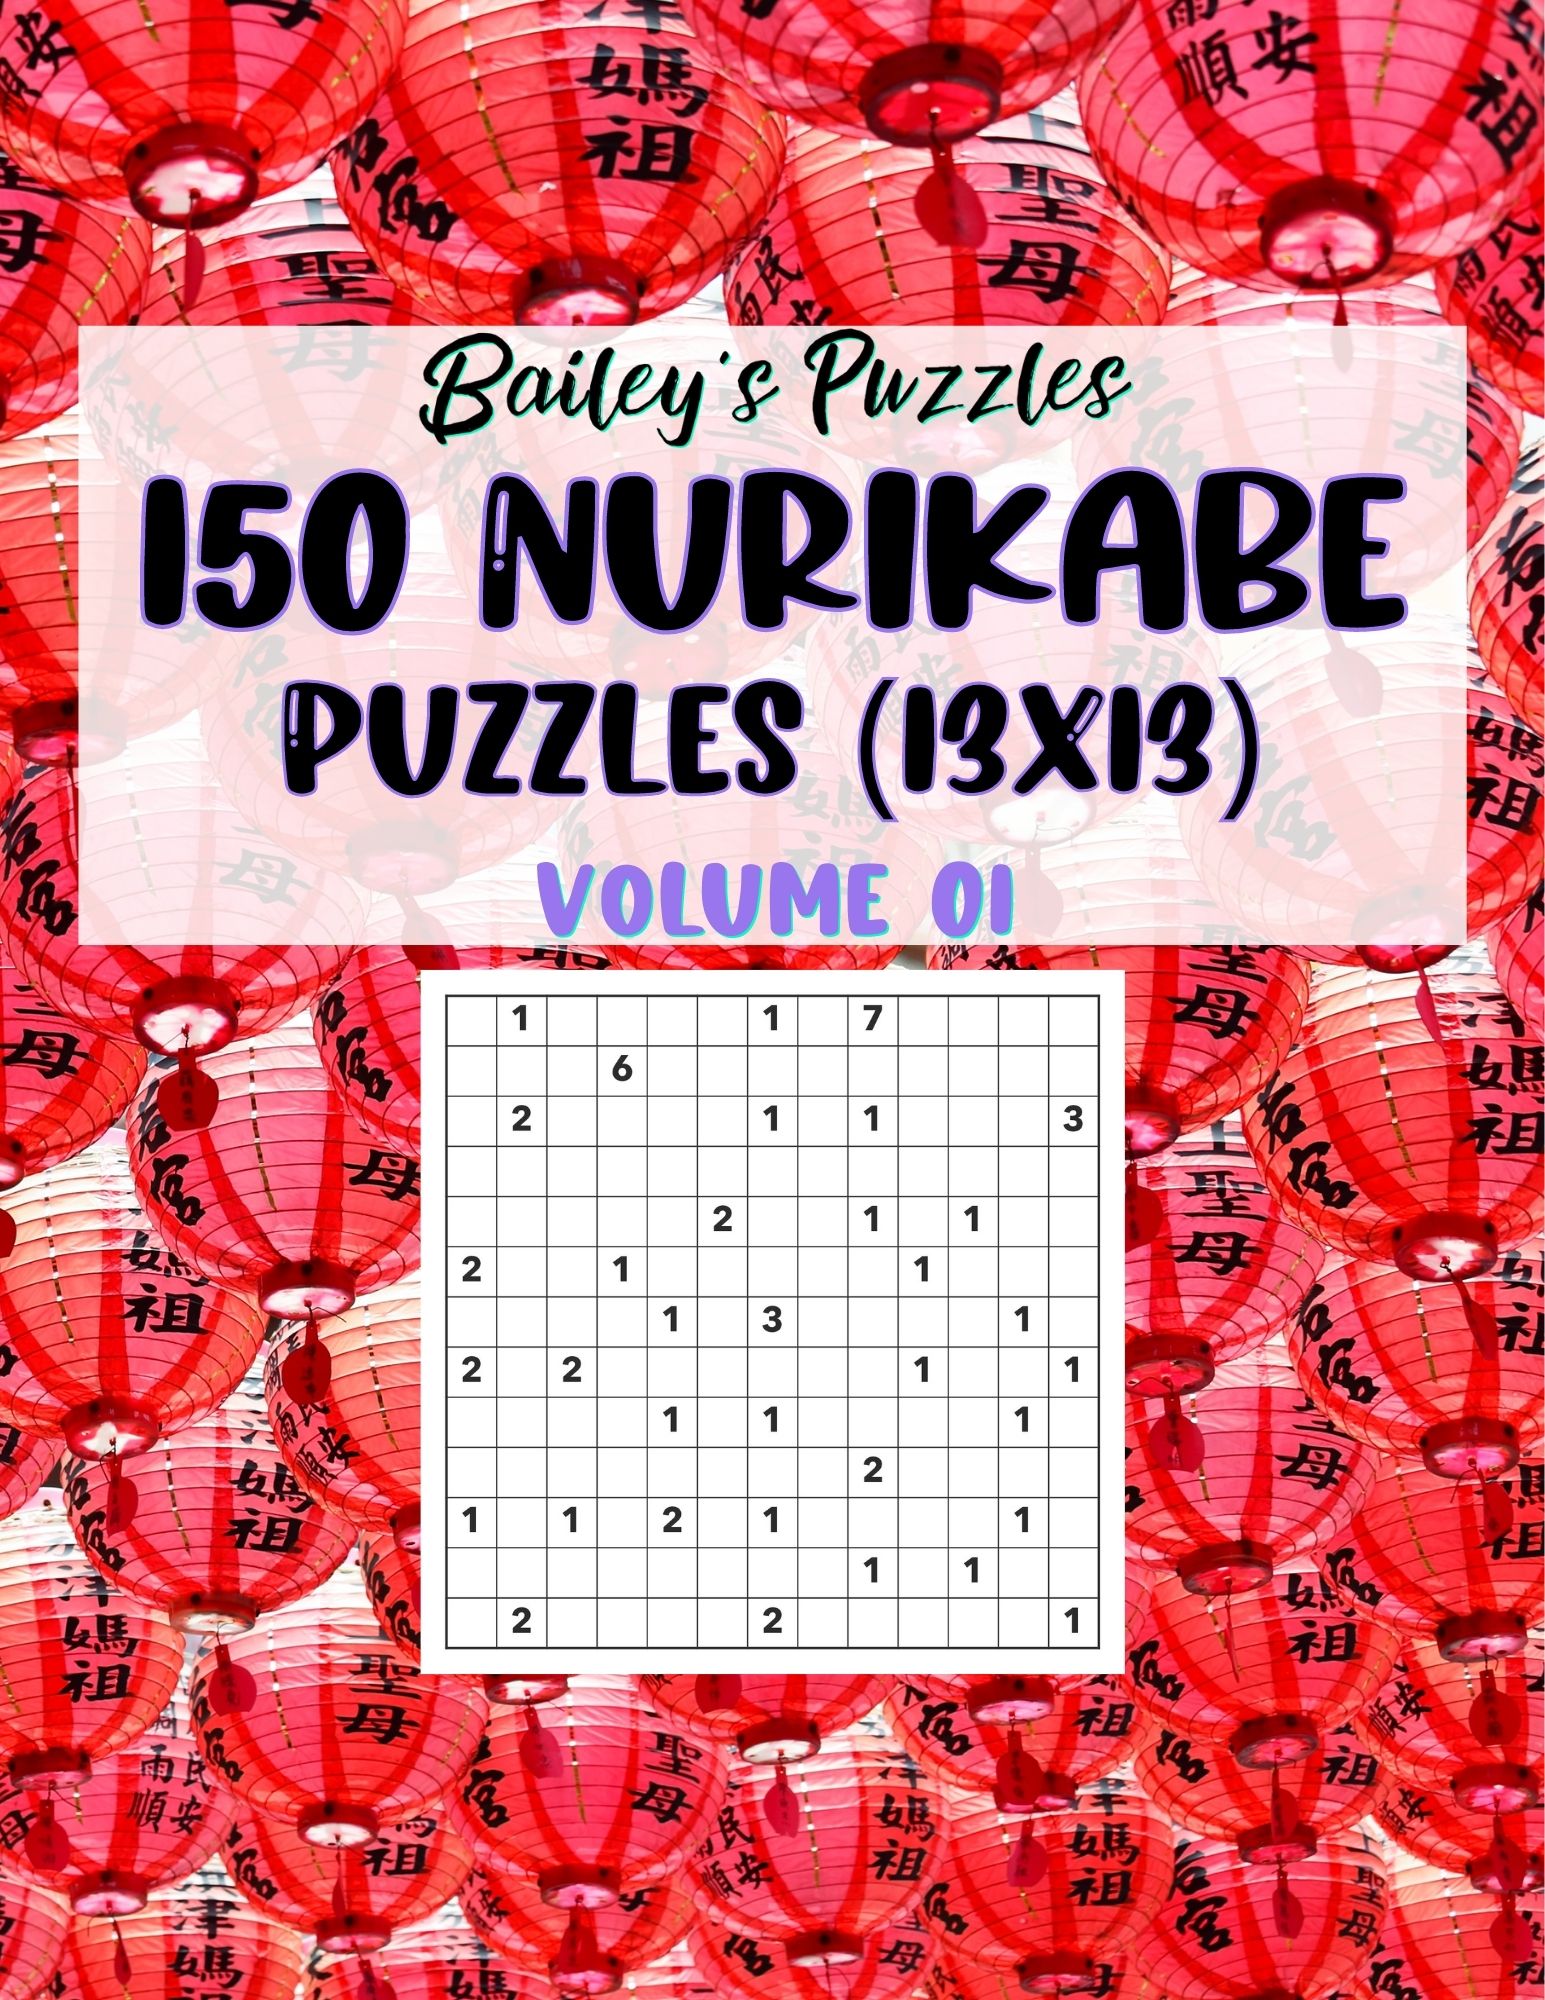 Front Cover - 150 Nurikabe Puzzles (13x13)